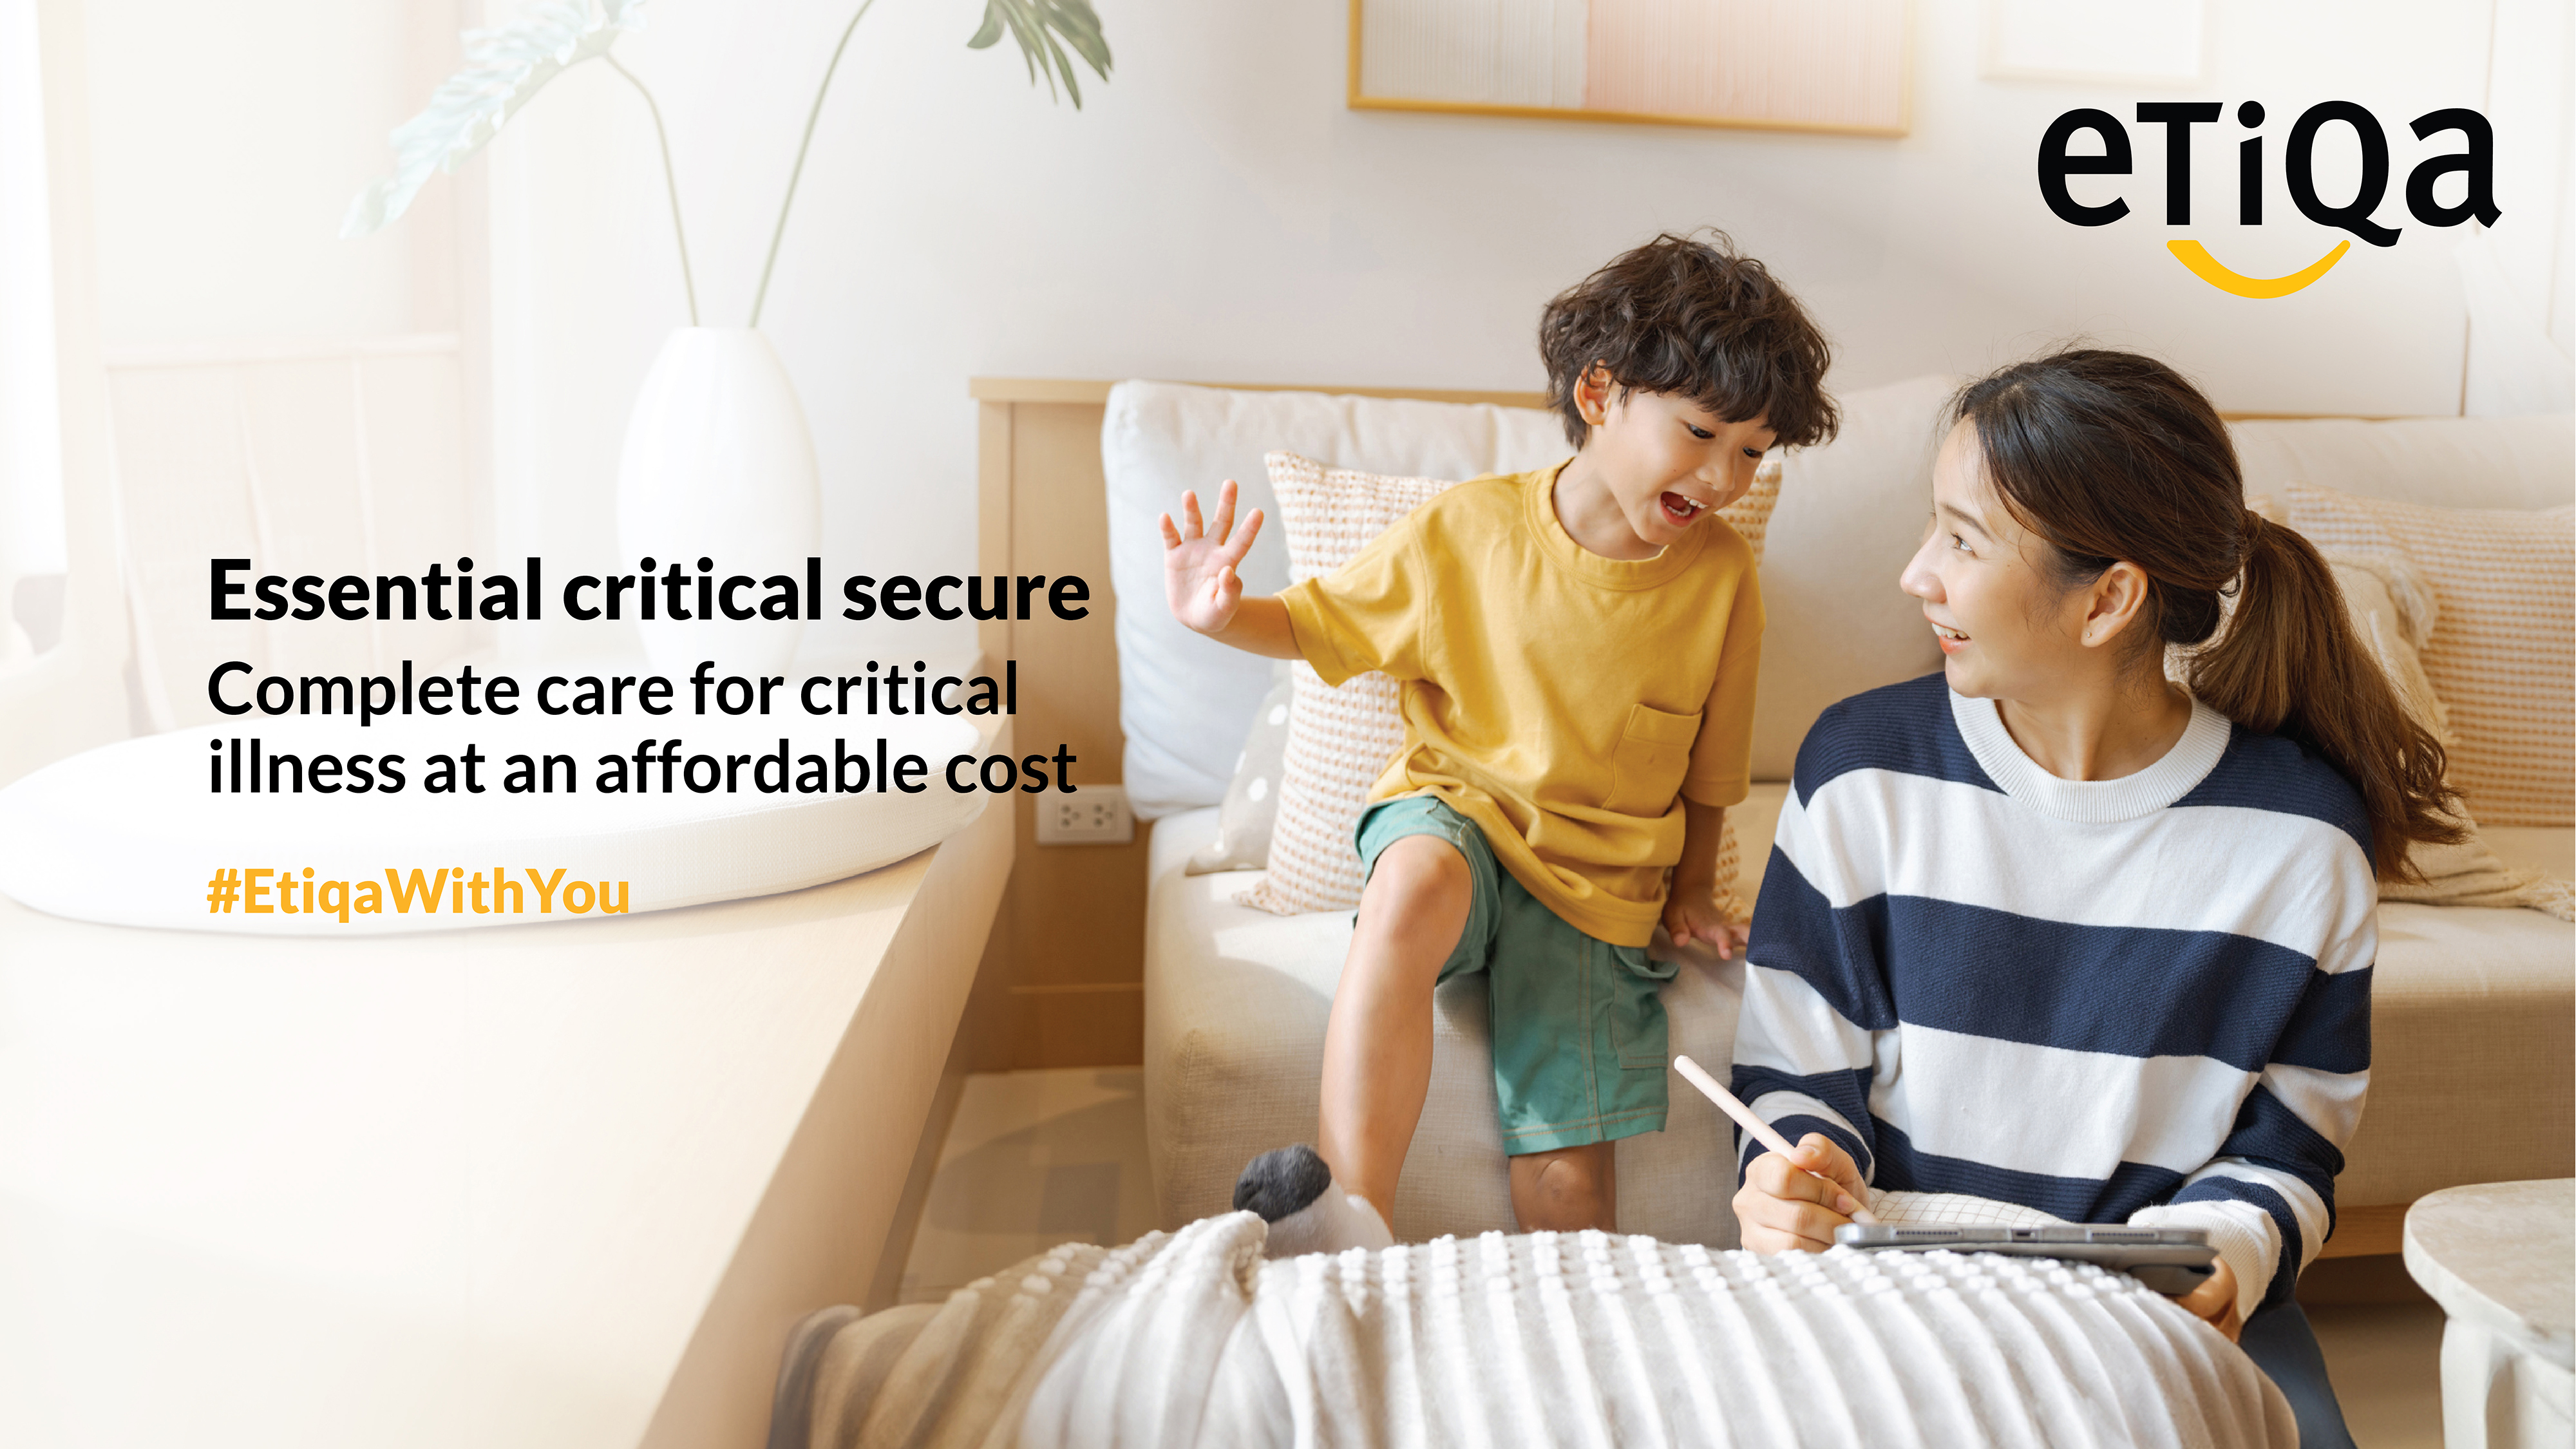 The new Essential critical secure plan features coverage for mental health conditions and first-in-market monthly cash payouts upon diagnosis of severe critical illness.